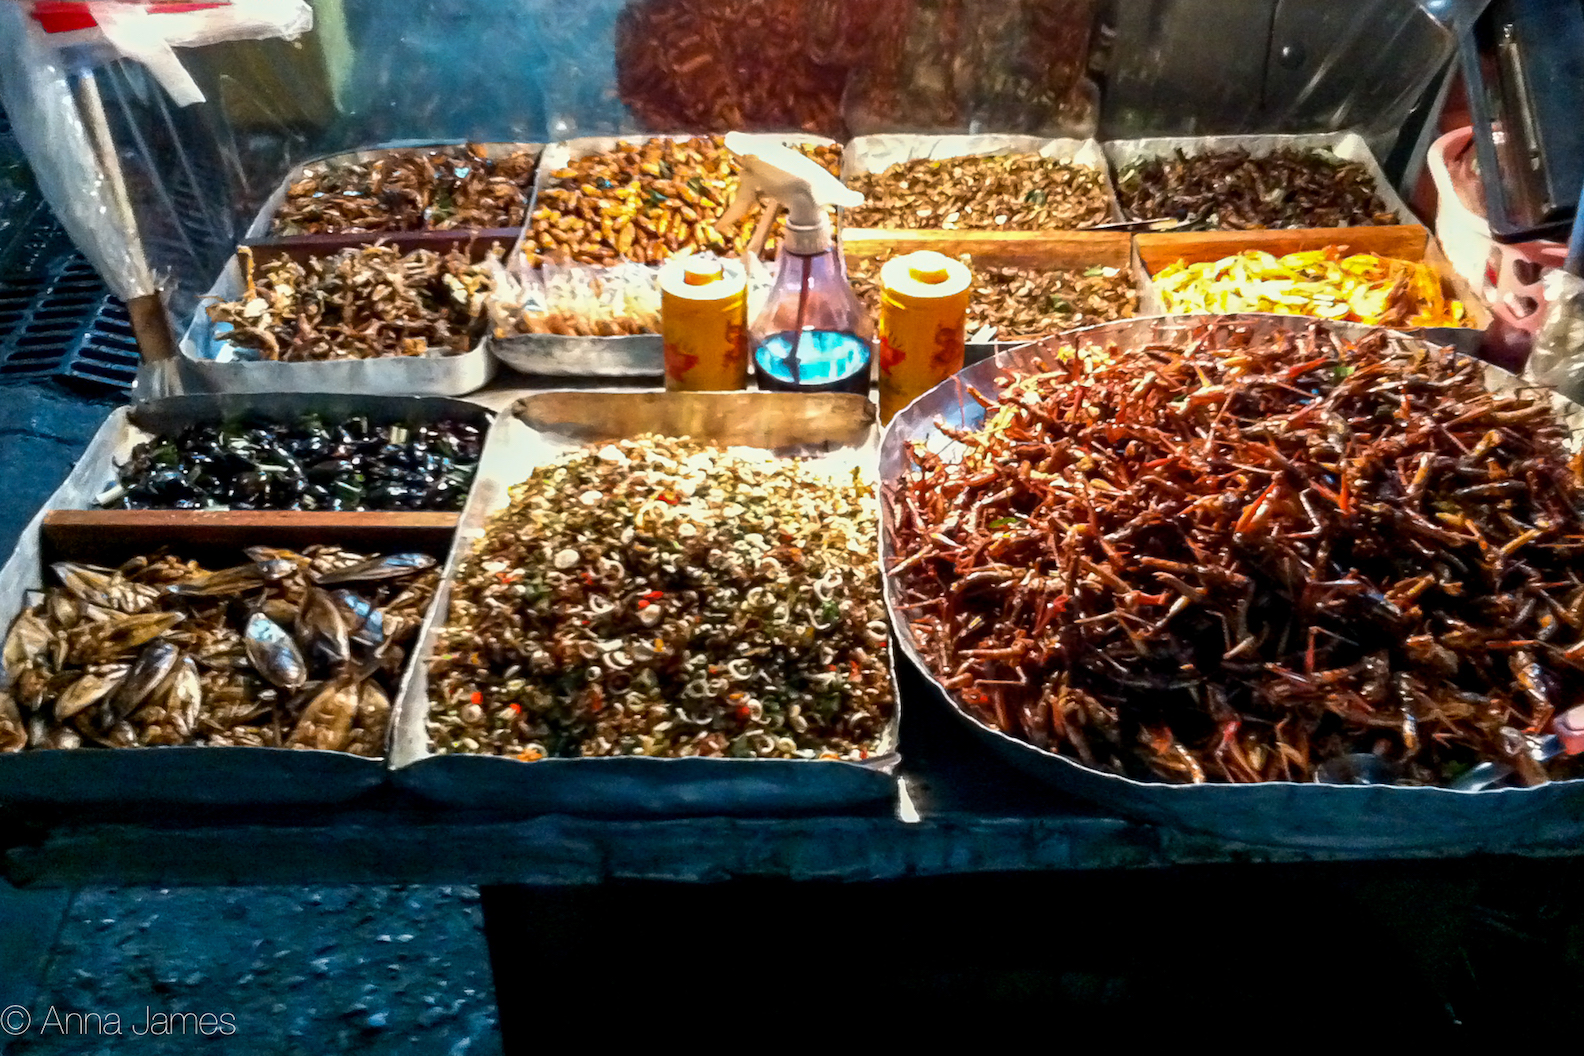 Fried crickets and other larvae